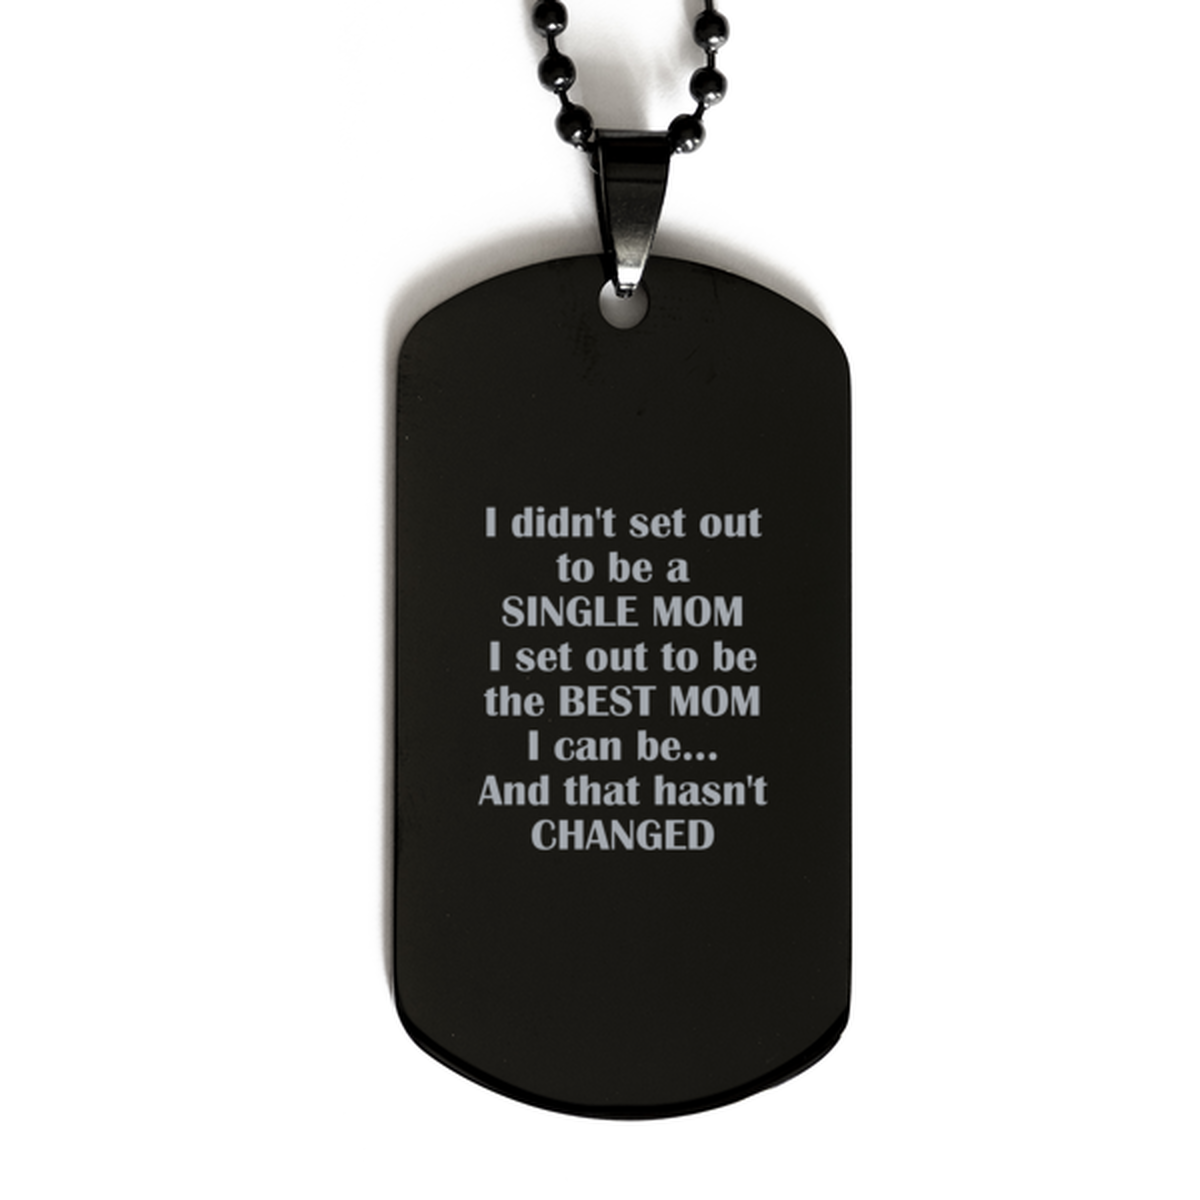 To My Single Mom Black Dog Tag, To Be The Best Mom, Mothers Day Gifts For Single Mom From Friends, Birthday Gifts For Women